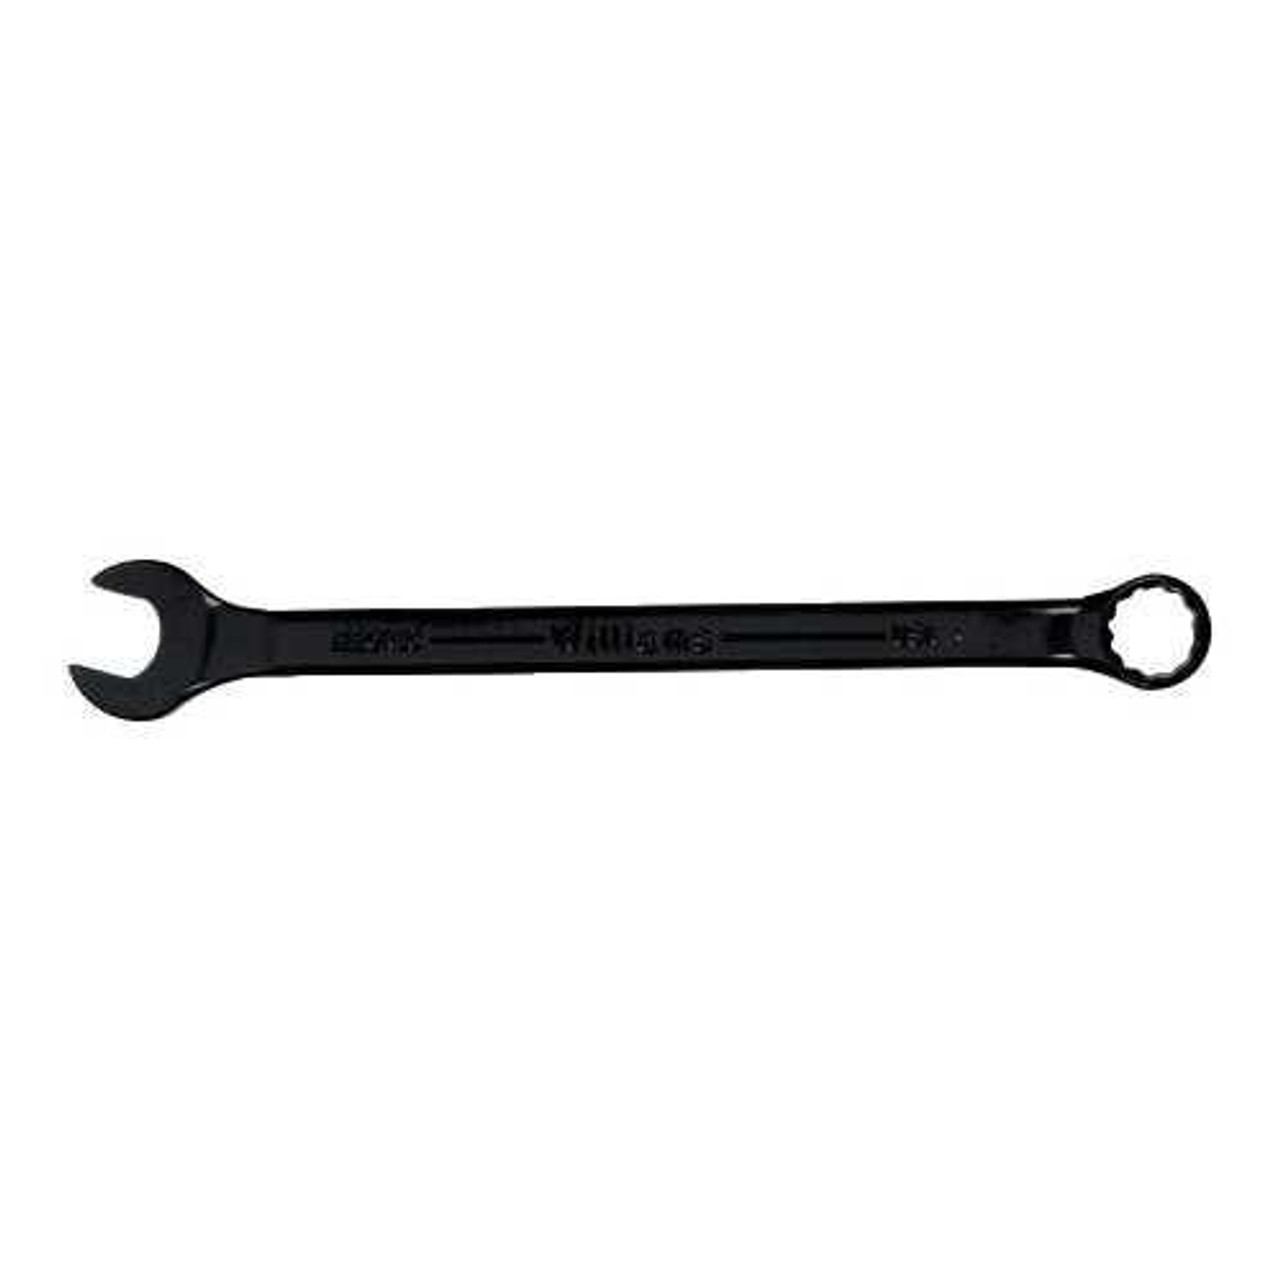 Williams 3/8" Williams Black Combination Wrench 12 Pt - 1212BSC 